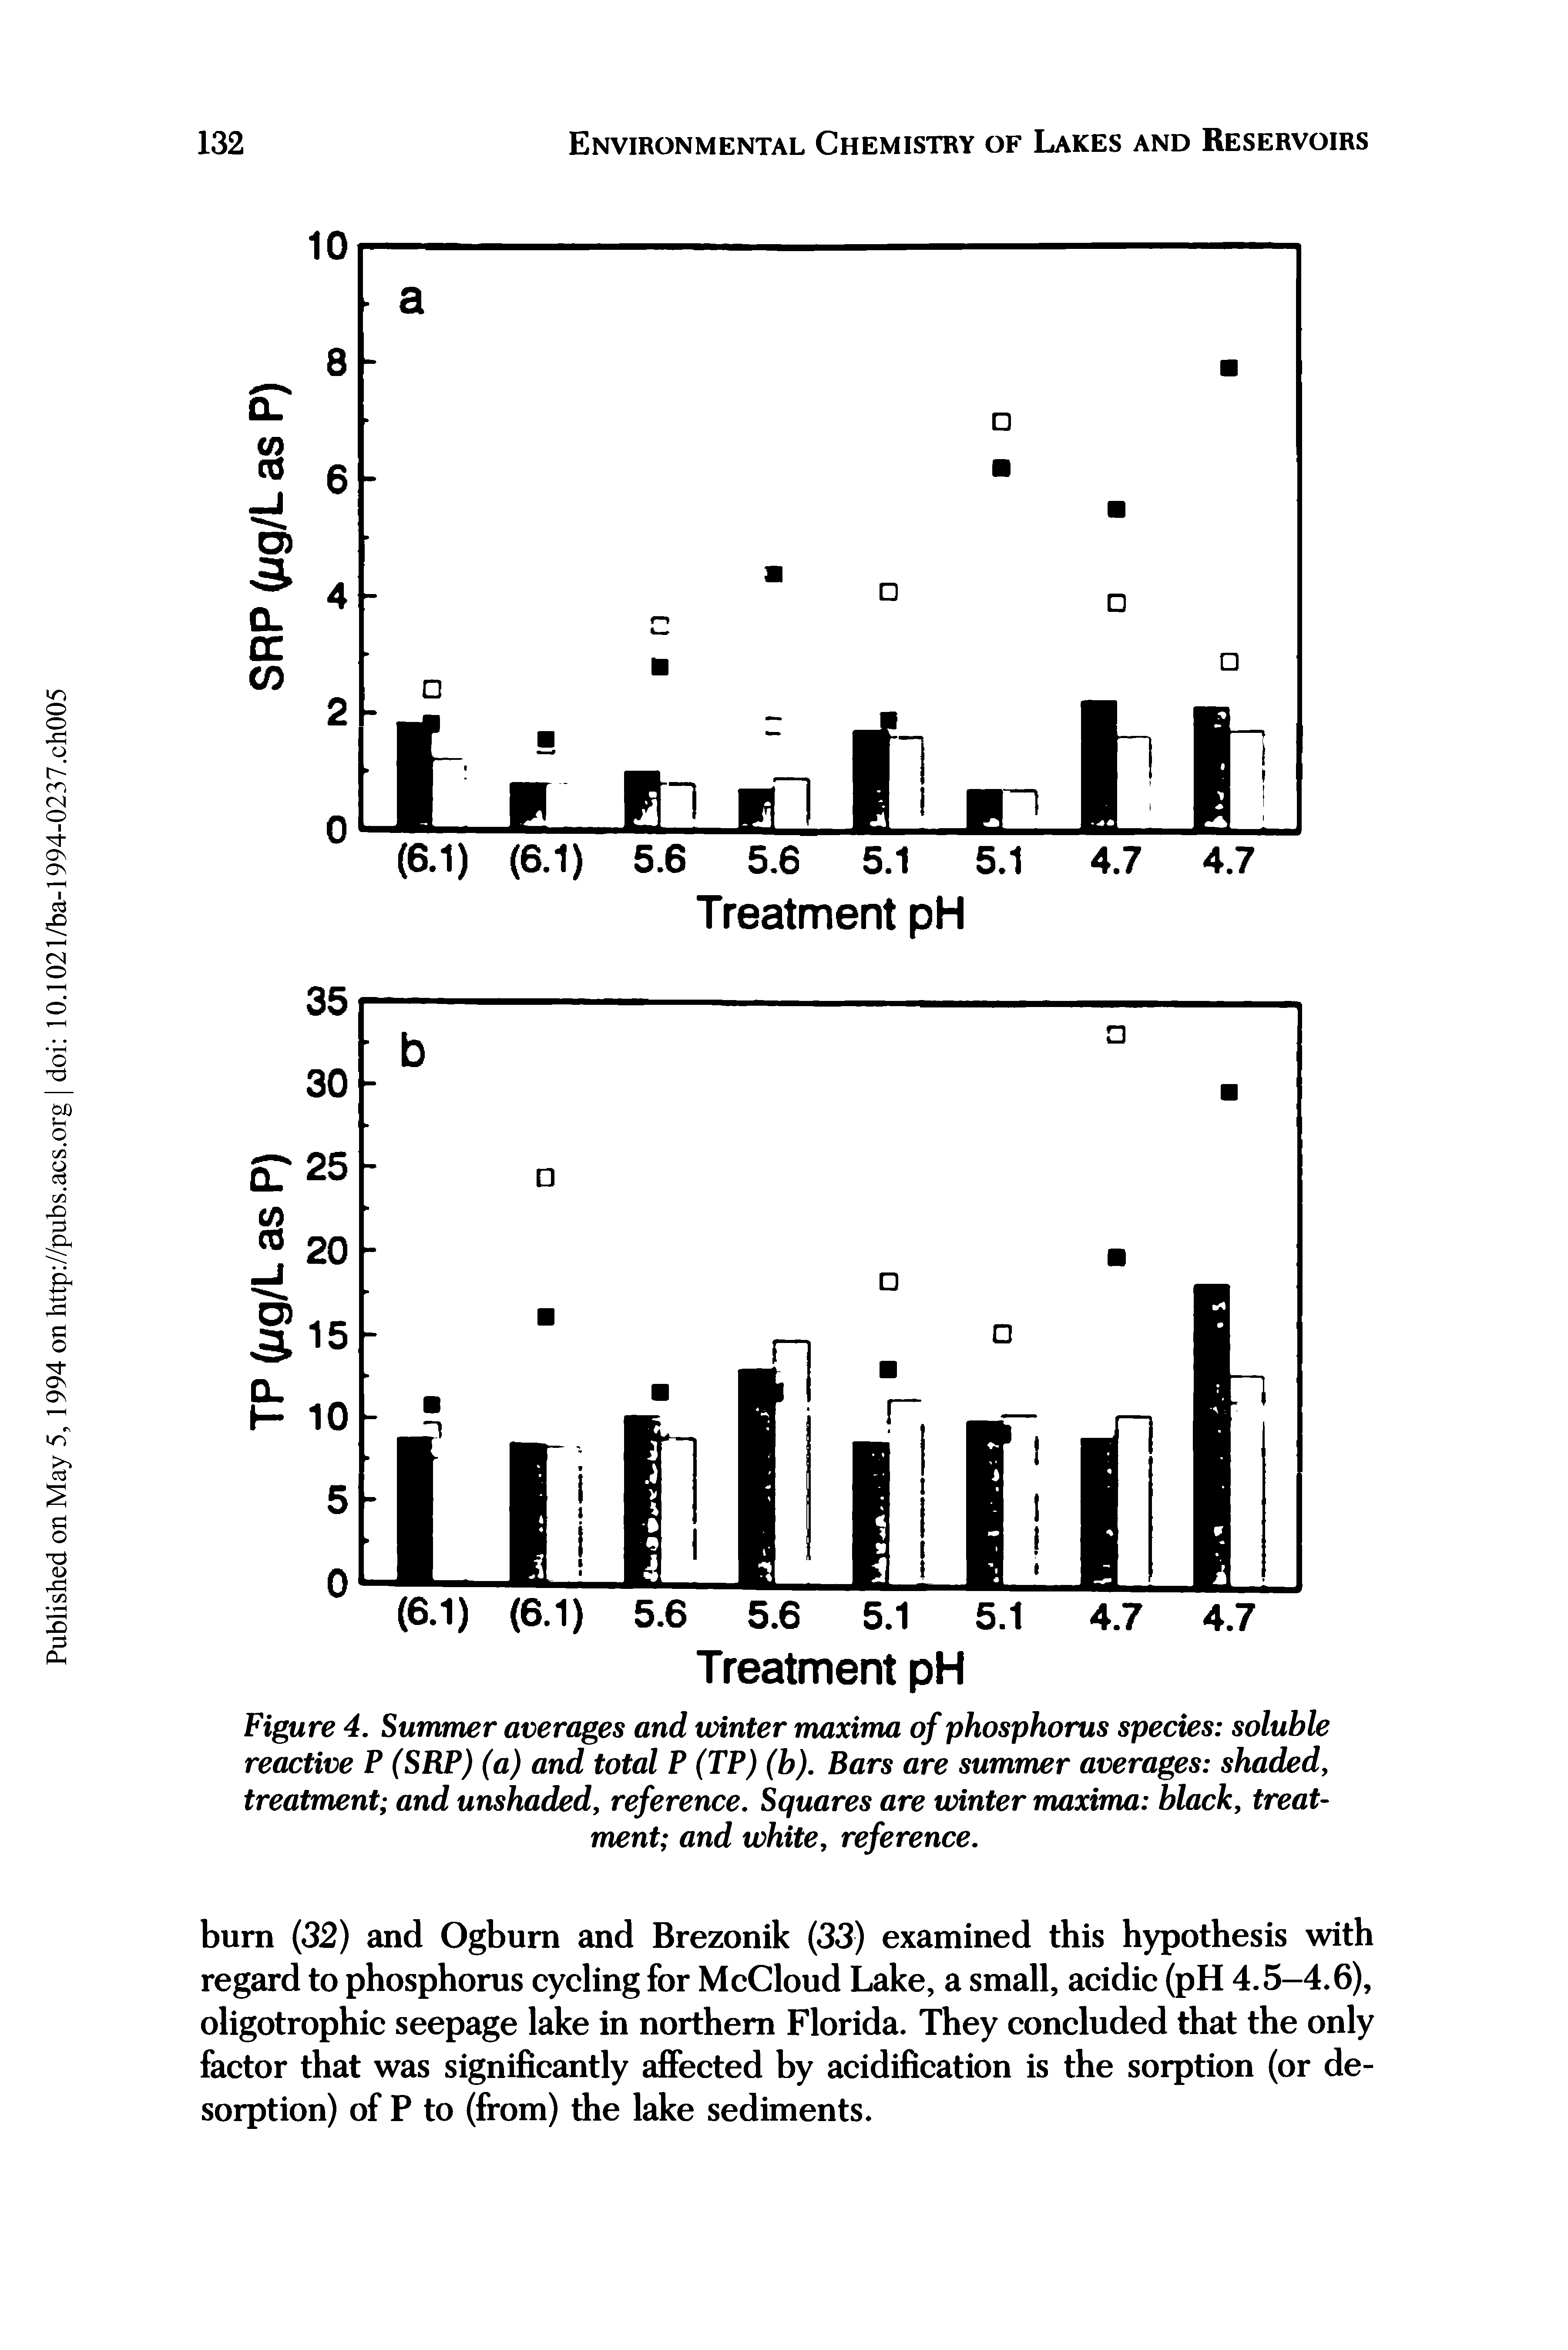 Figure 4. Summer averages and winter maxima of phosphorus species soluble reactive P (SRP) (a) and total P (TP) (b). Bars are summer averages shaded, treatment and unshaded, reference. Squares are winter maxima black, treatment and white, reference.